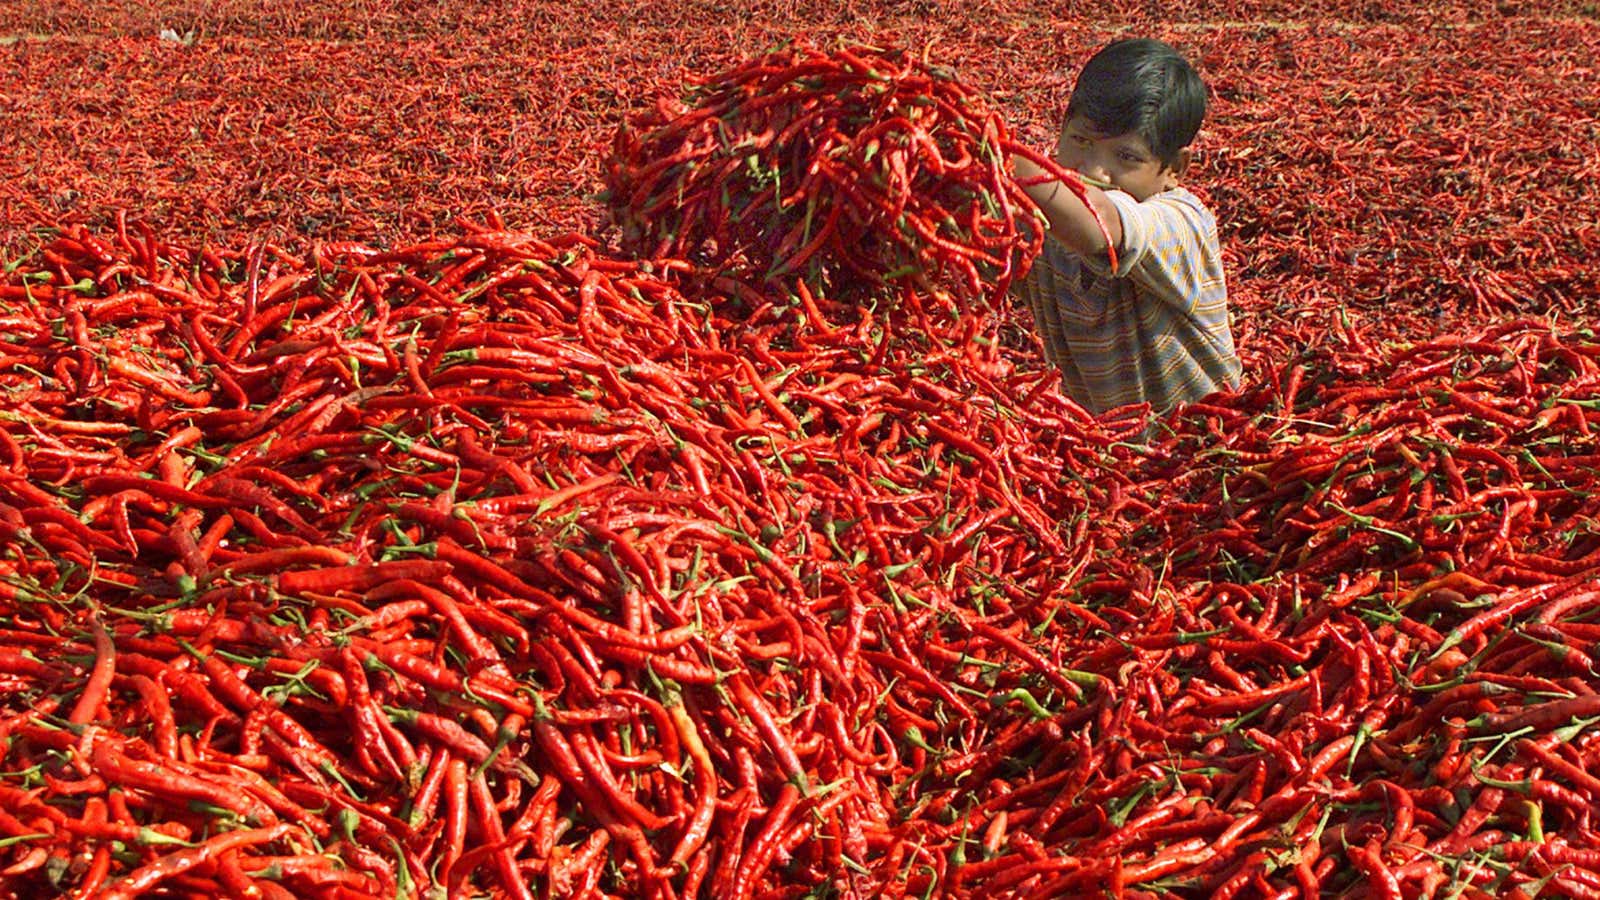 No matter how many chili peppers Huy Fong harvests, it may never be enough.